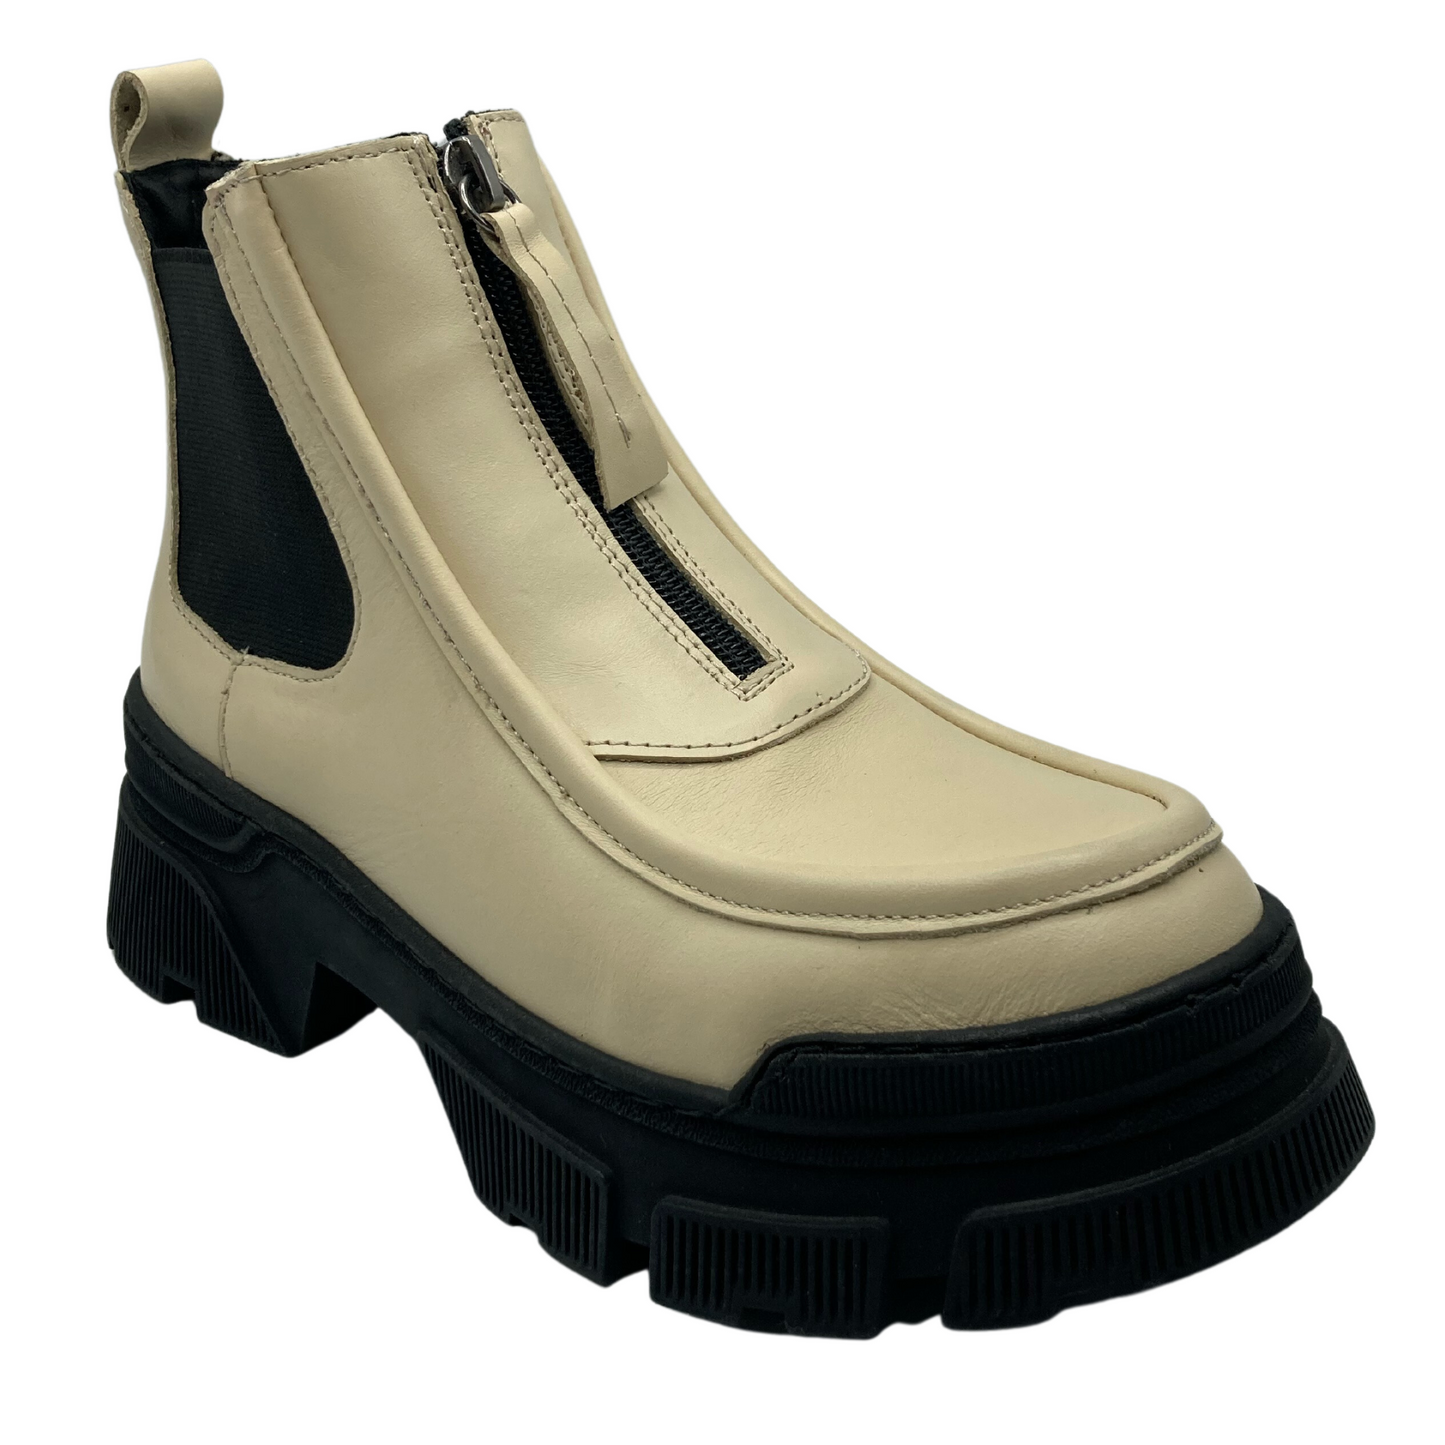 45 degree angled view of beige leather ankle boot with black zipper and black rubber outsole